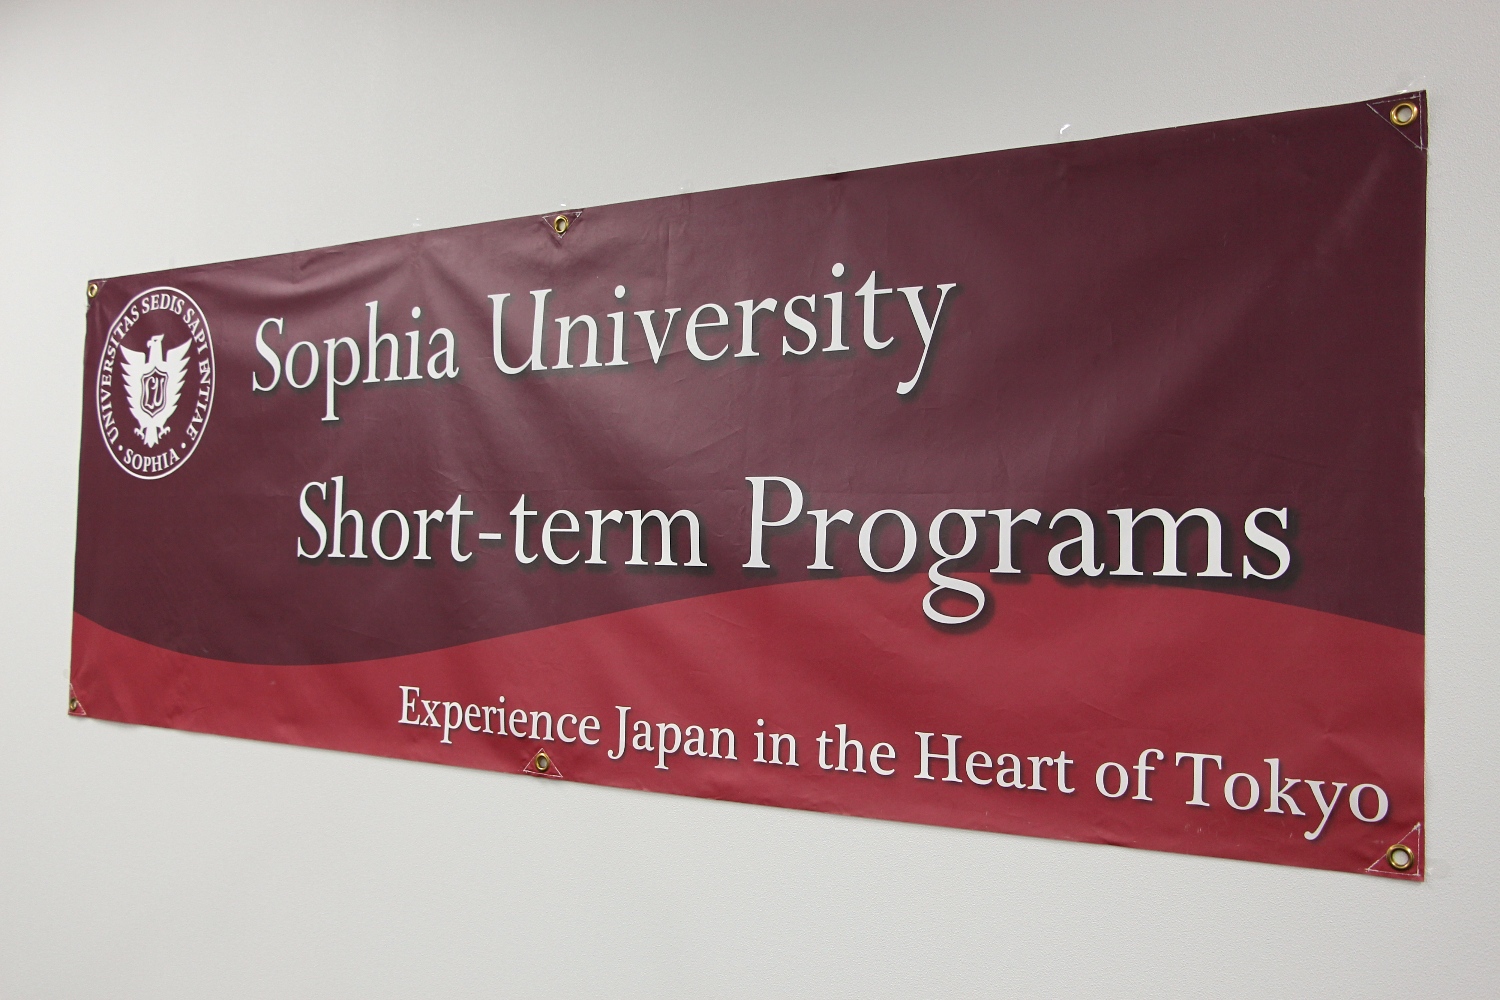 UWI St. Augustine Campus Centre for Language Learning Japanese Language Students Take Part in Sophia University’s ‘January Session’ Online